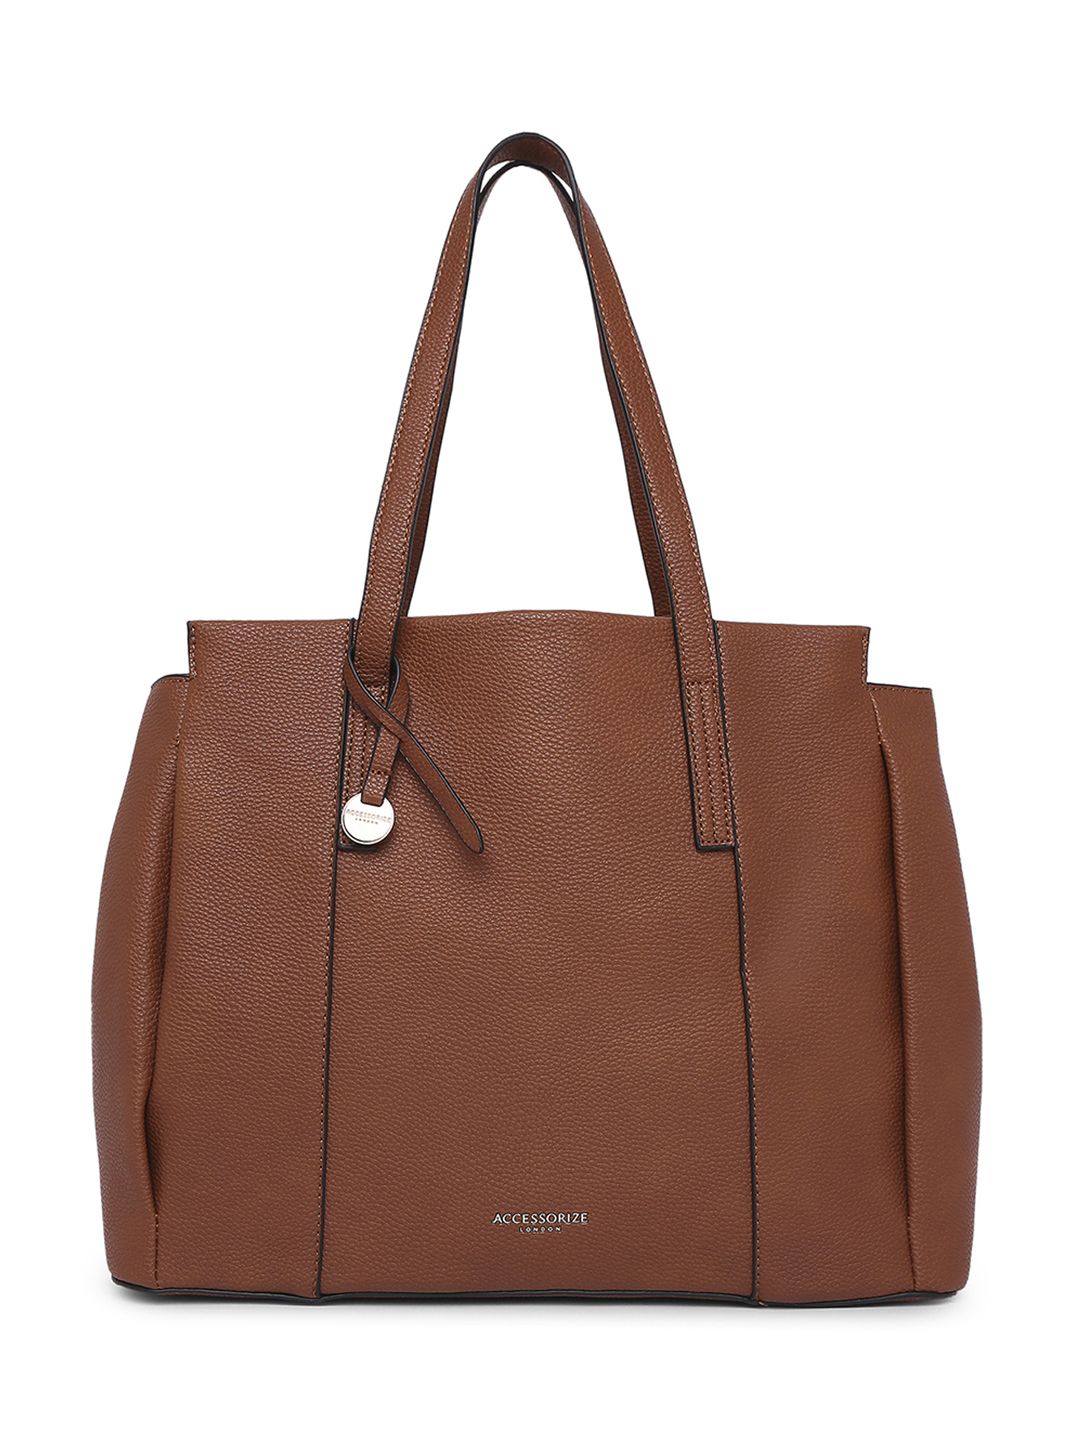 Accessorize Tan Brown Solid Structured Shoulder Bag Price in India